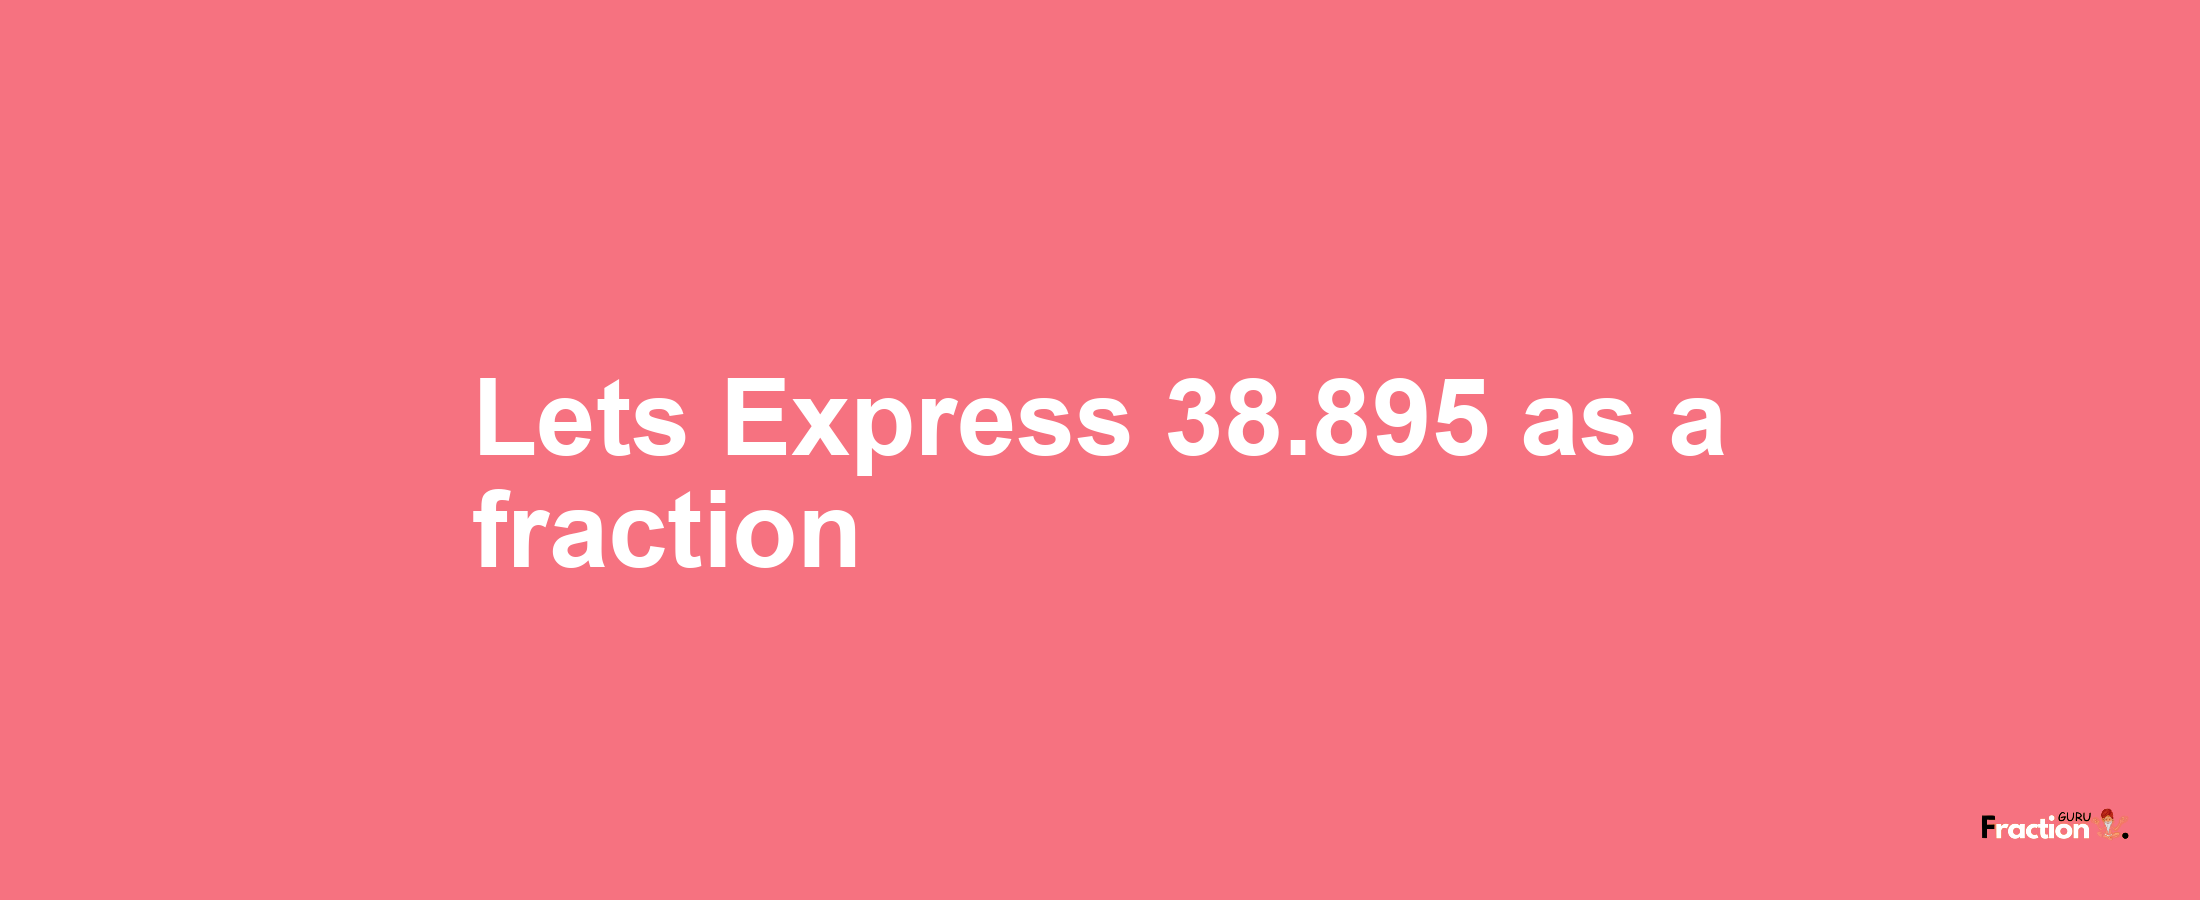 Lets Express 38.895 as afraction